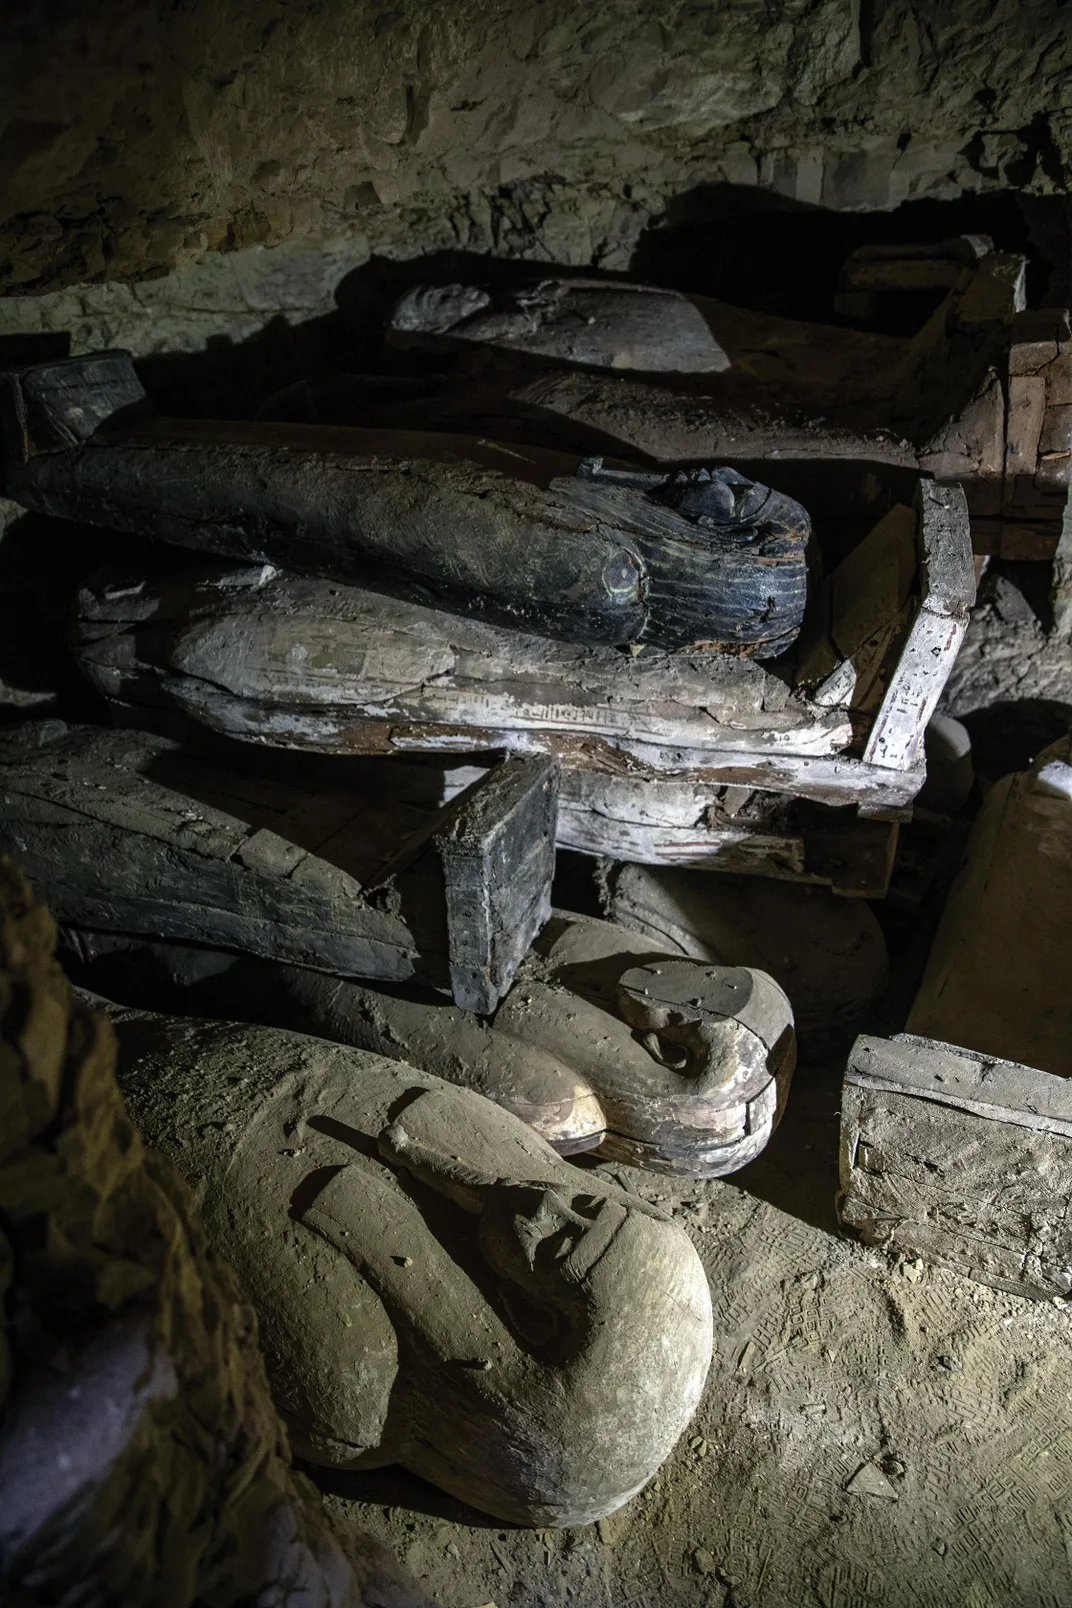 The variety of burials inside the shafts